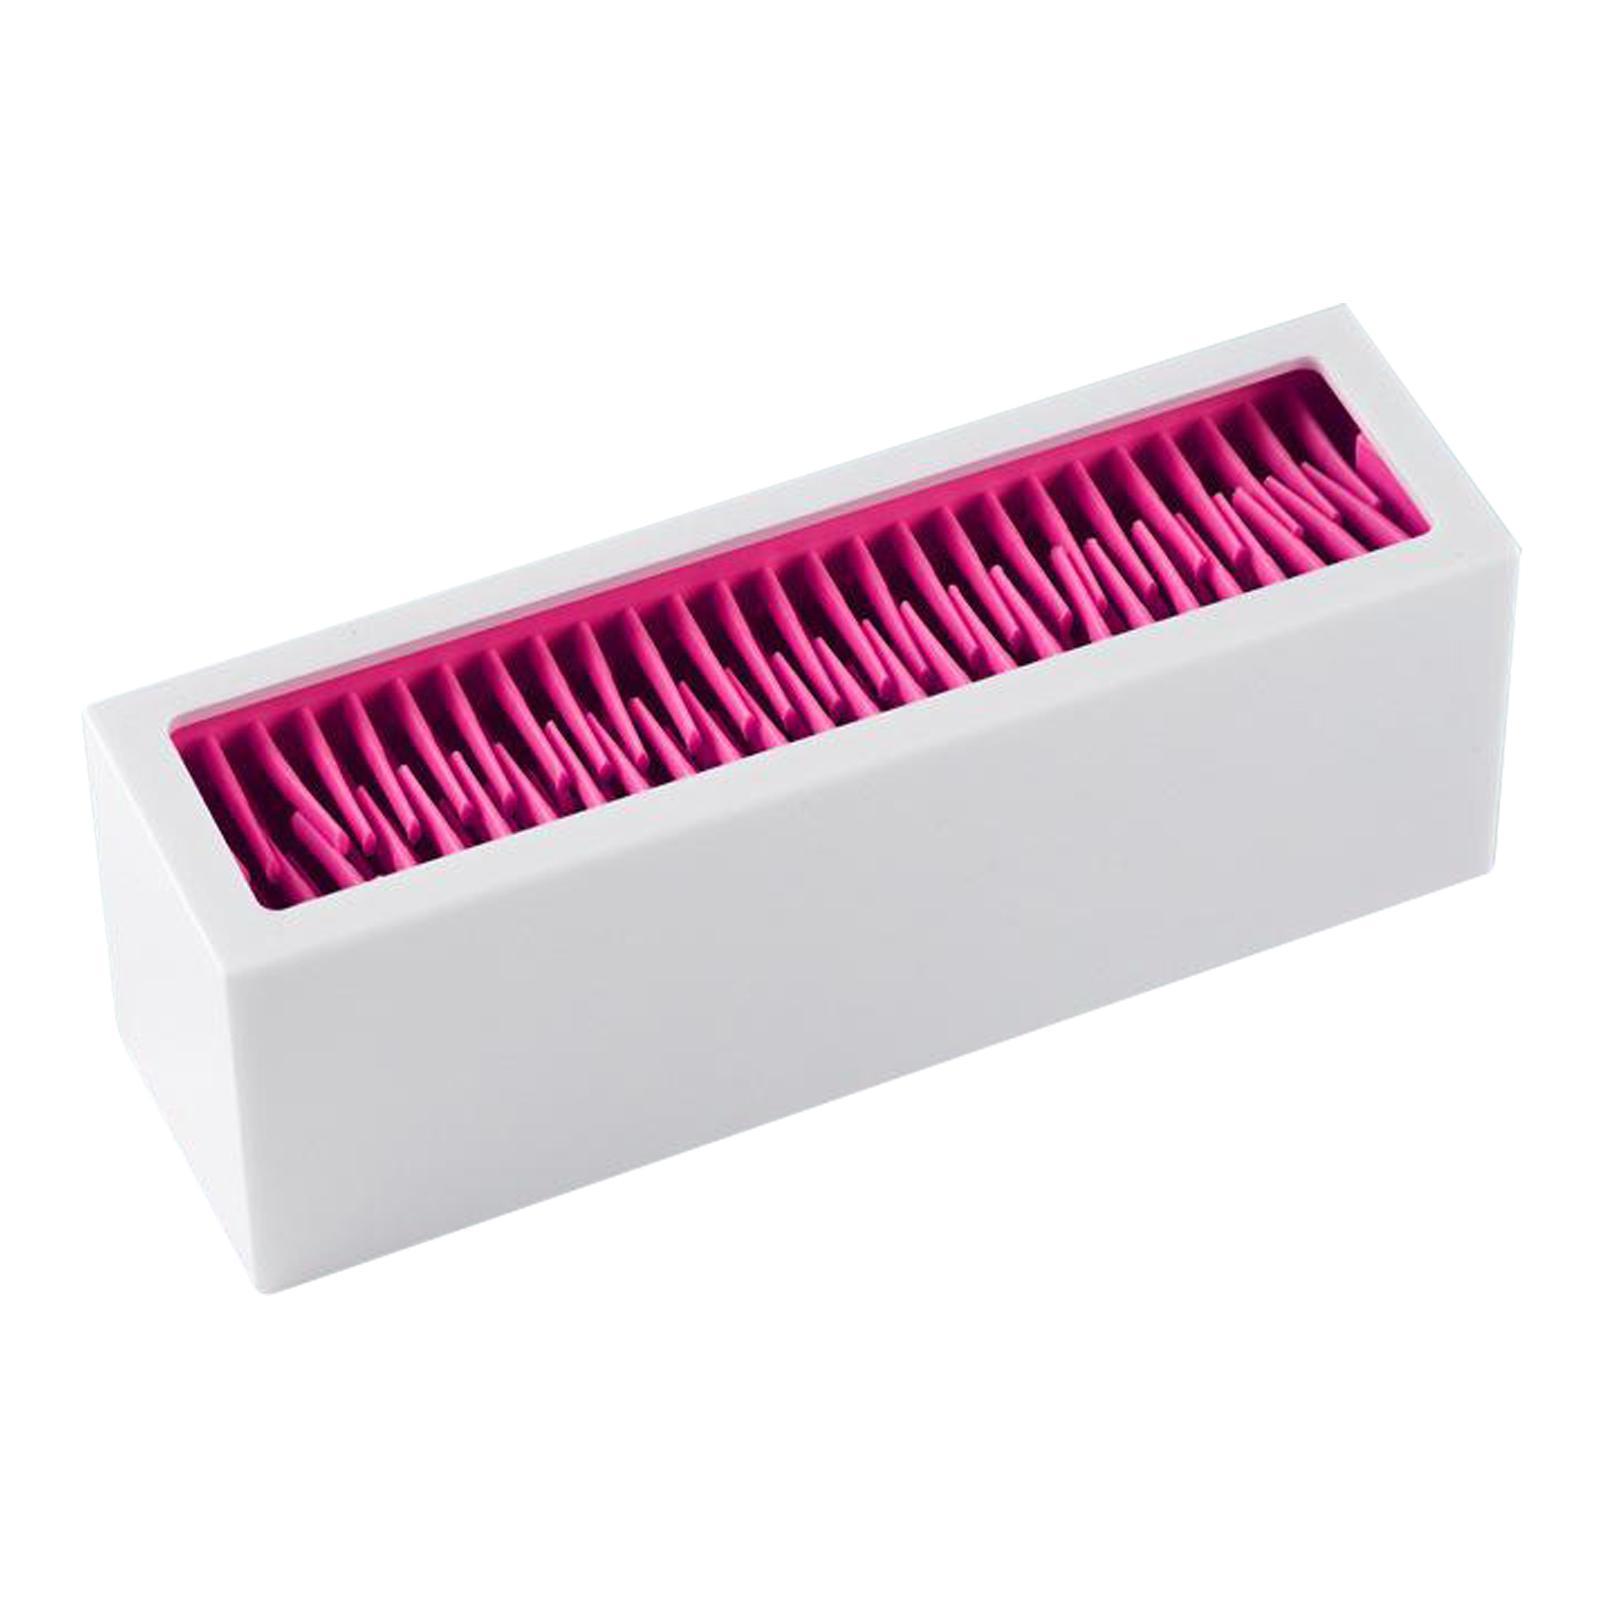 Makeup Brushes Holder Silicone Storage Rack for Cosmetic Tools